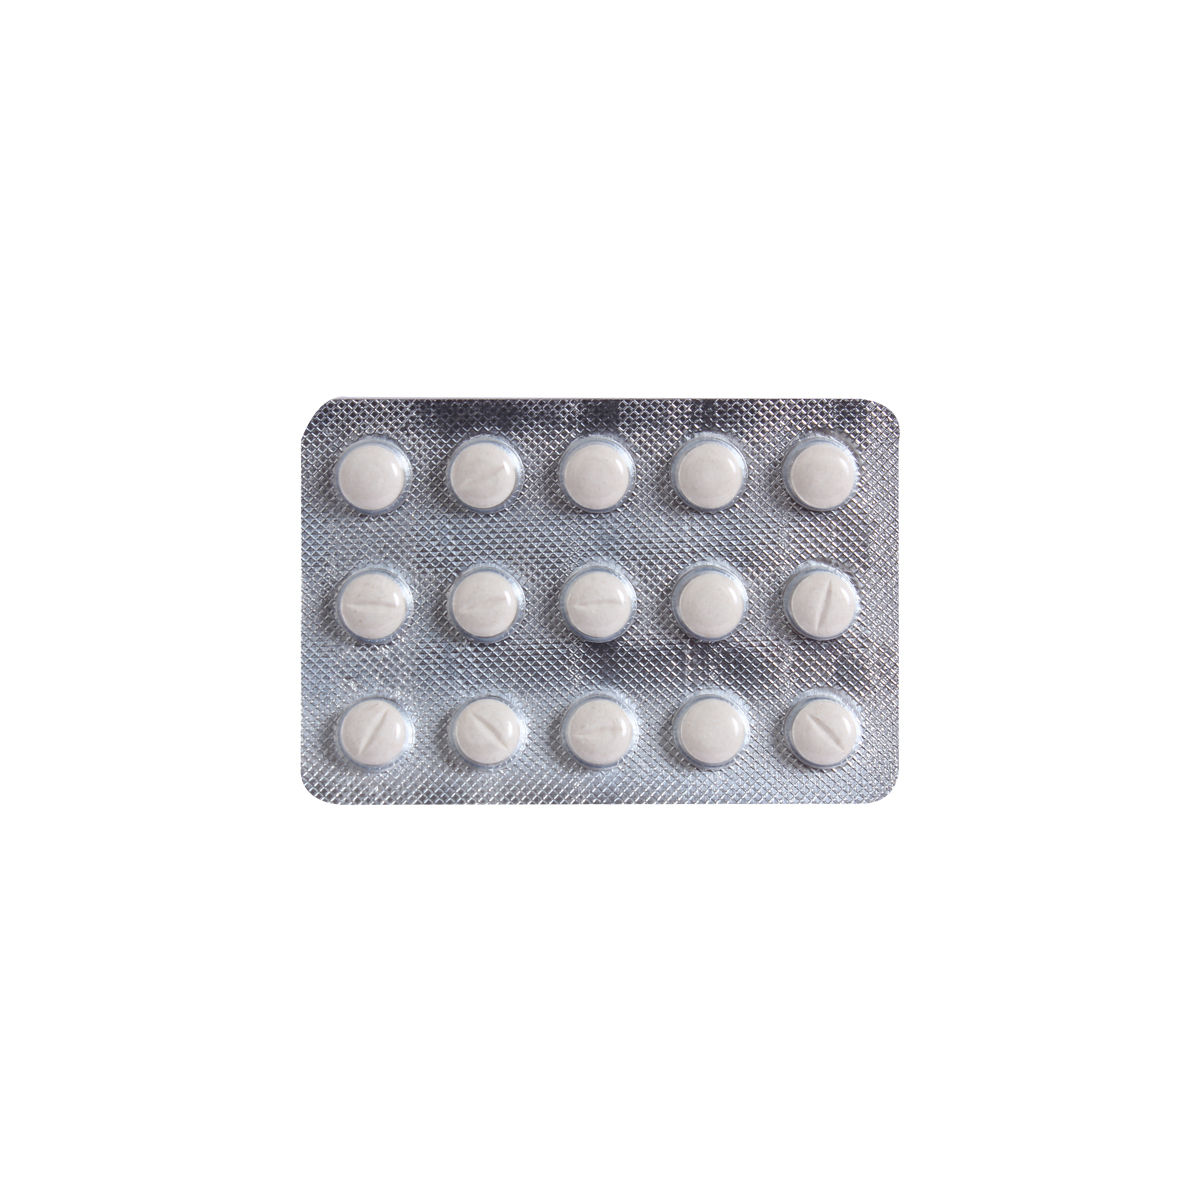 Buy Lam Rest 3mg Md Tablet 15's Online